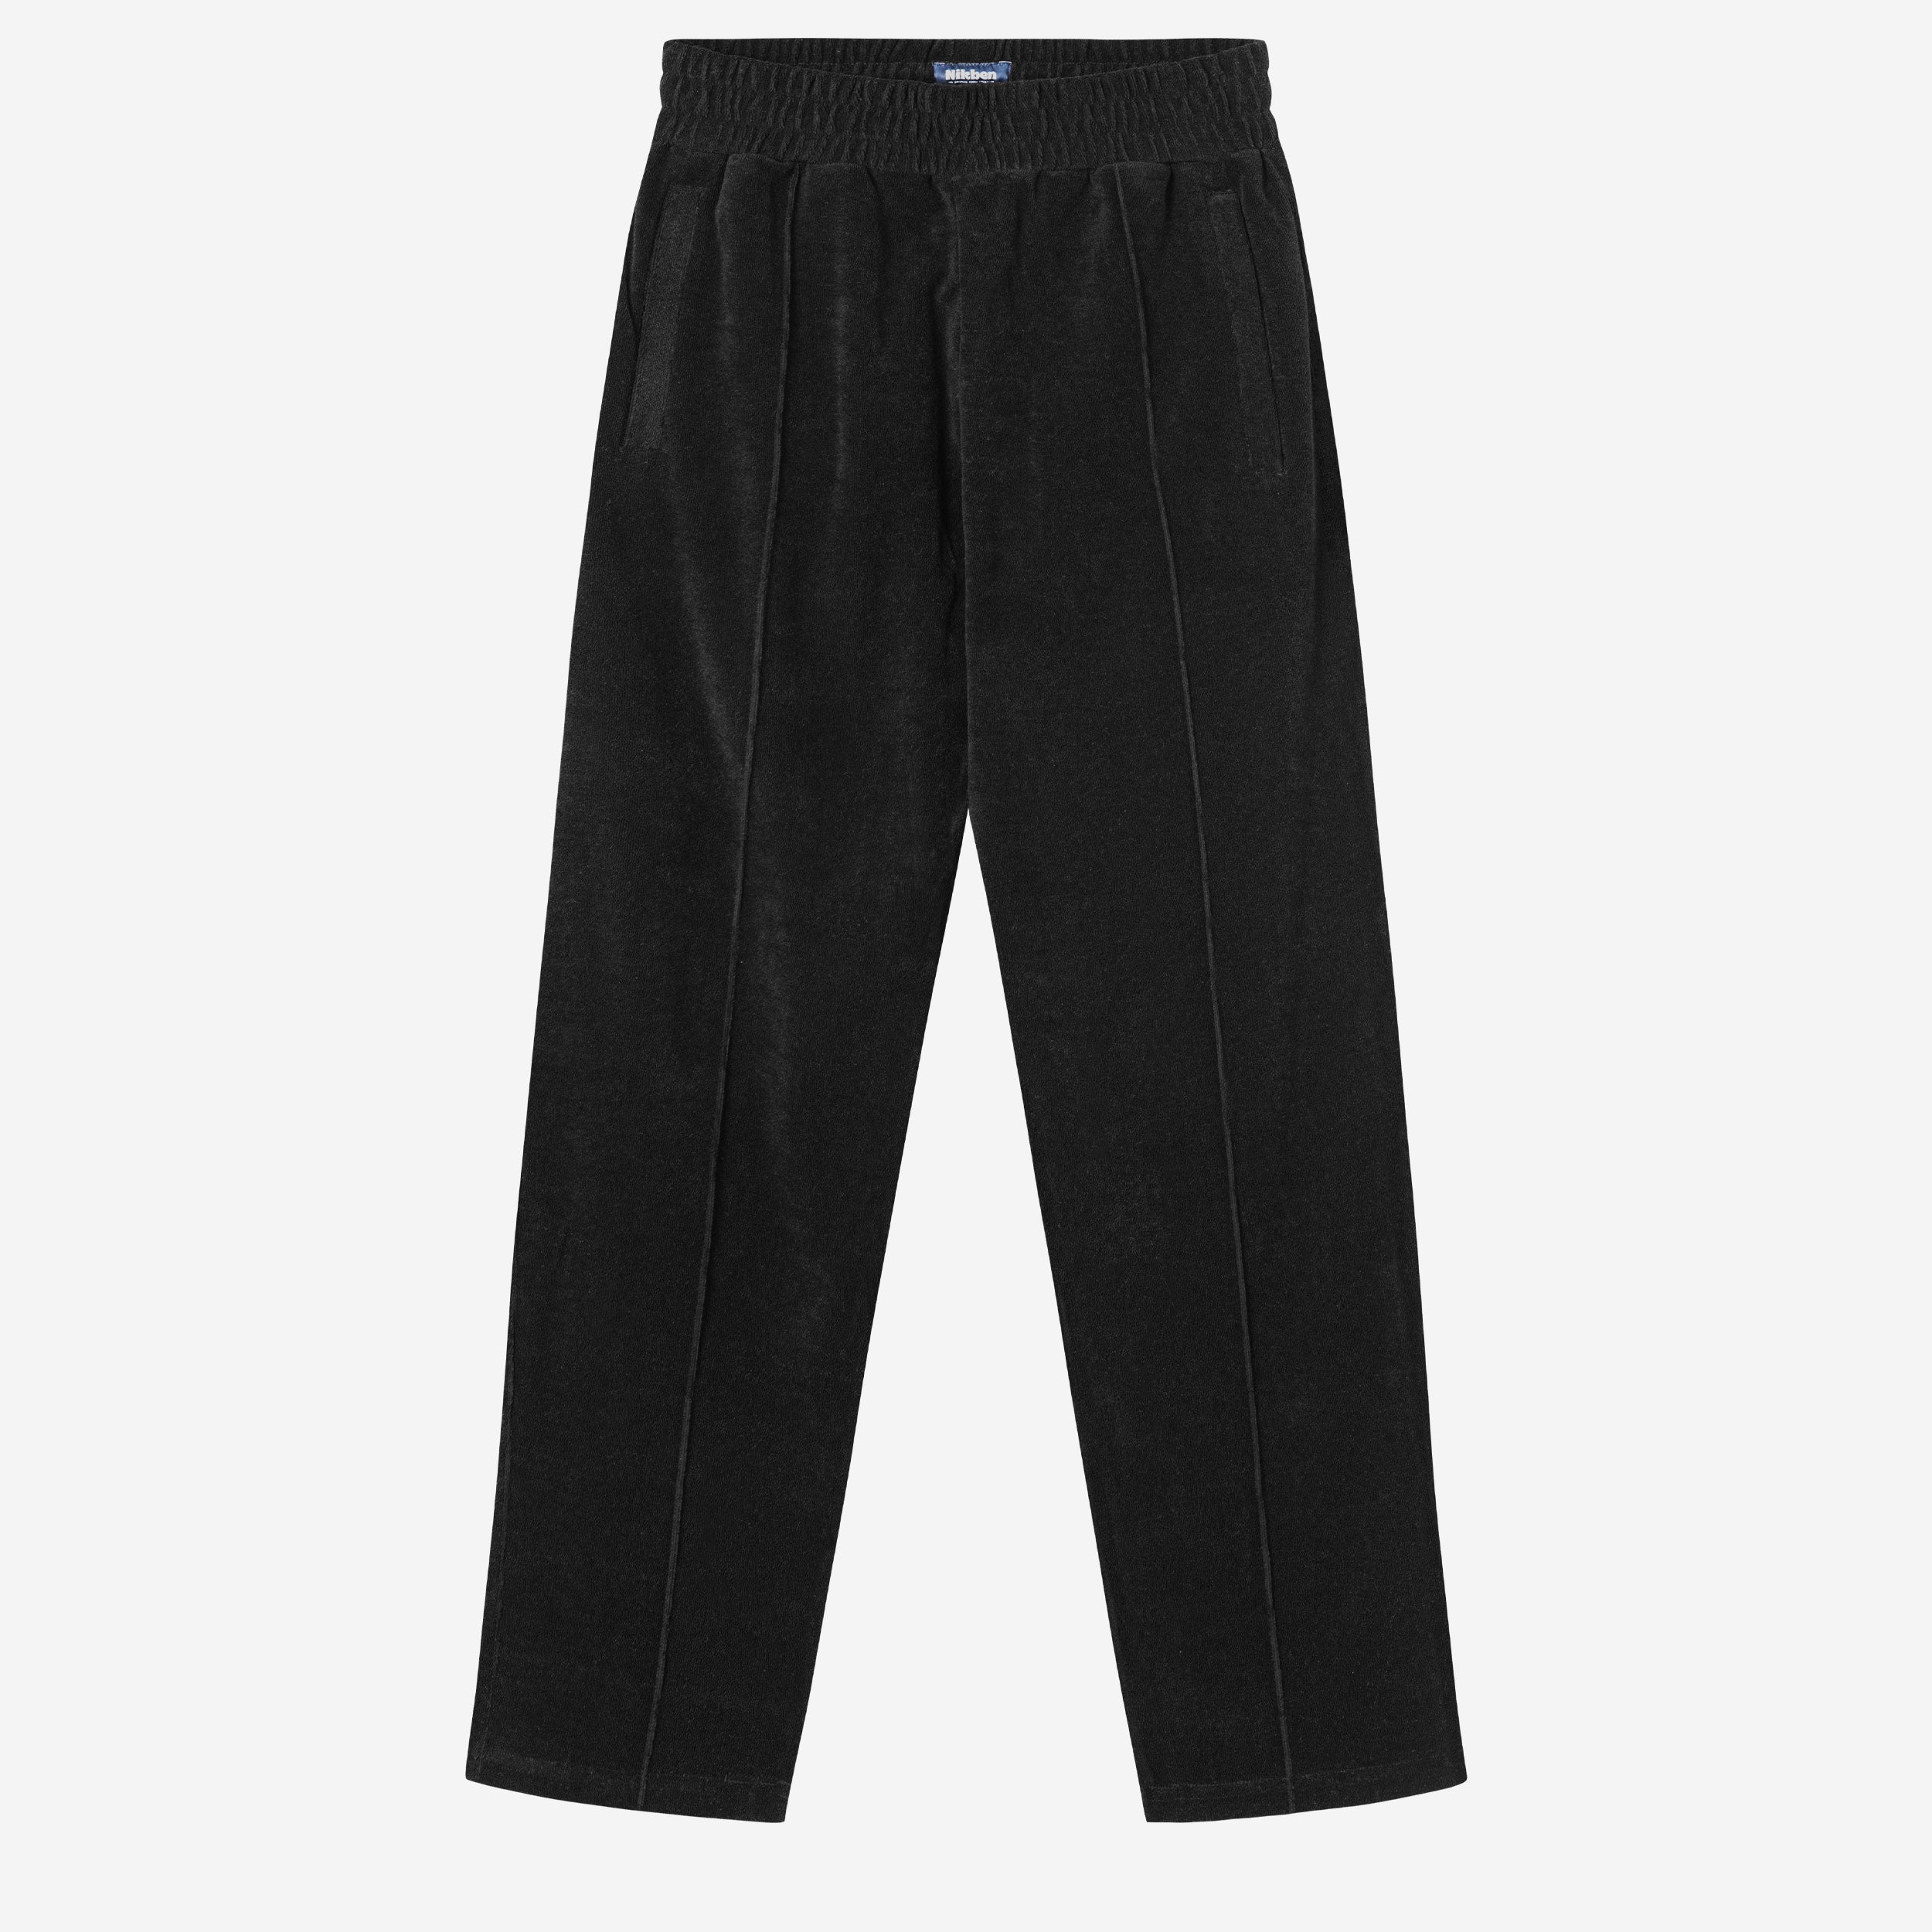 Black pants in terry toweling fabric